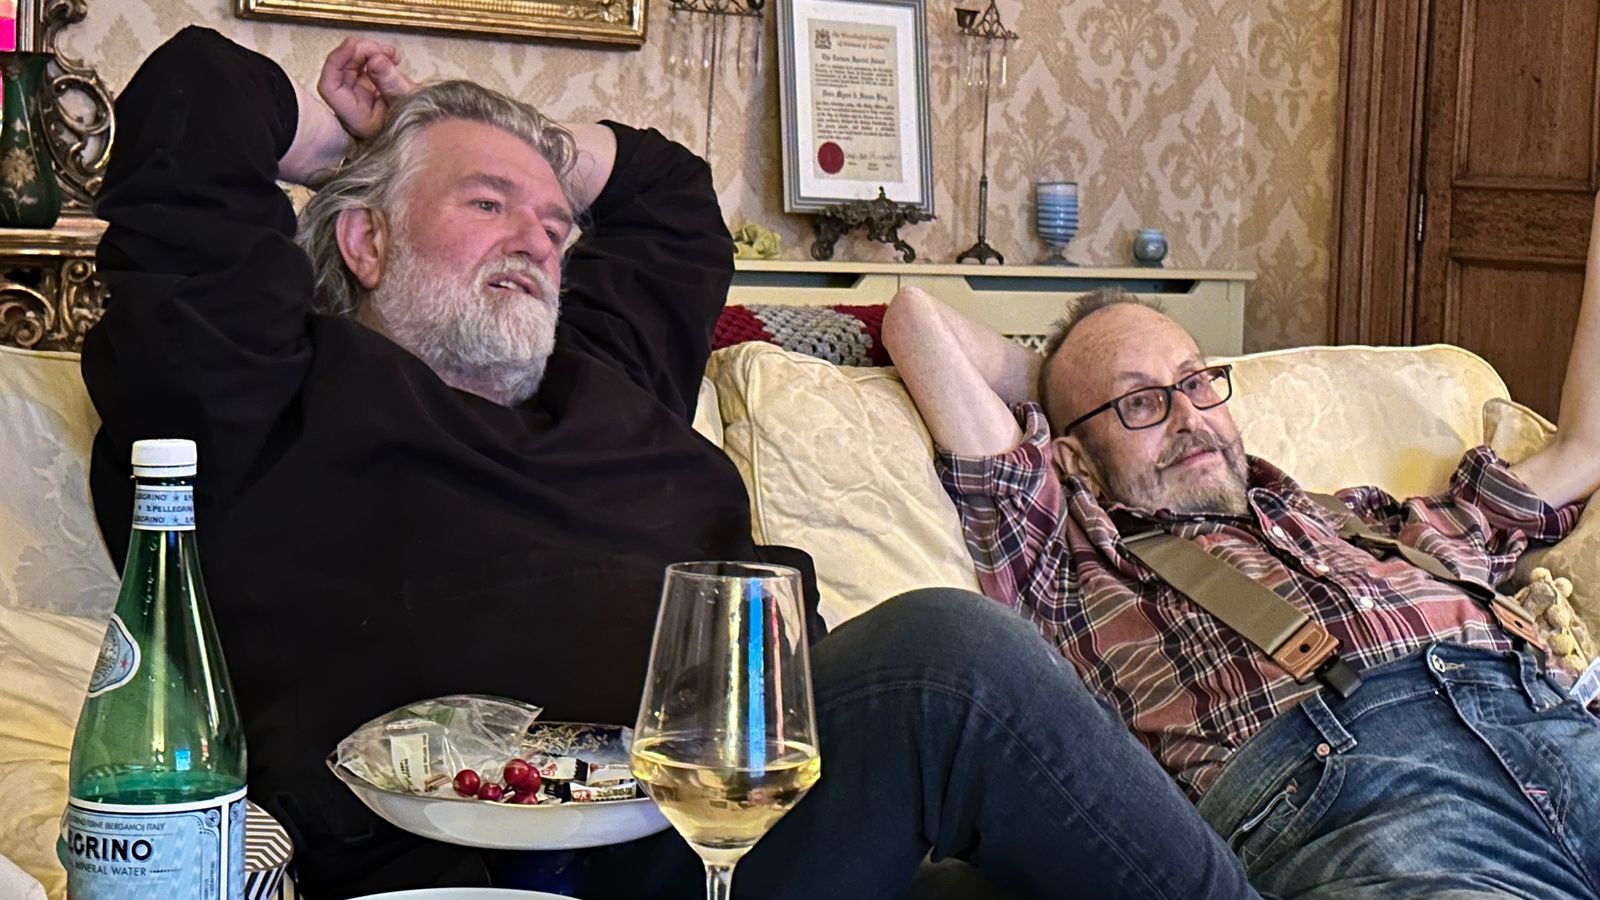 Hairy Bikers Dave Myers and Si King pictured relaxing together in 'last photo' of cooking duo